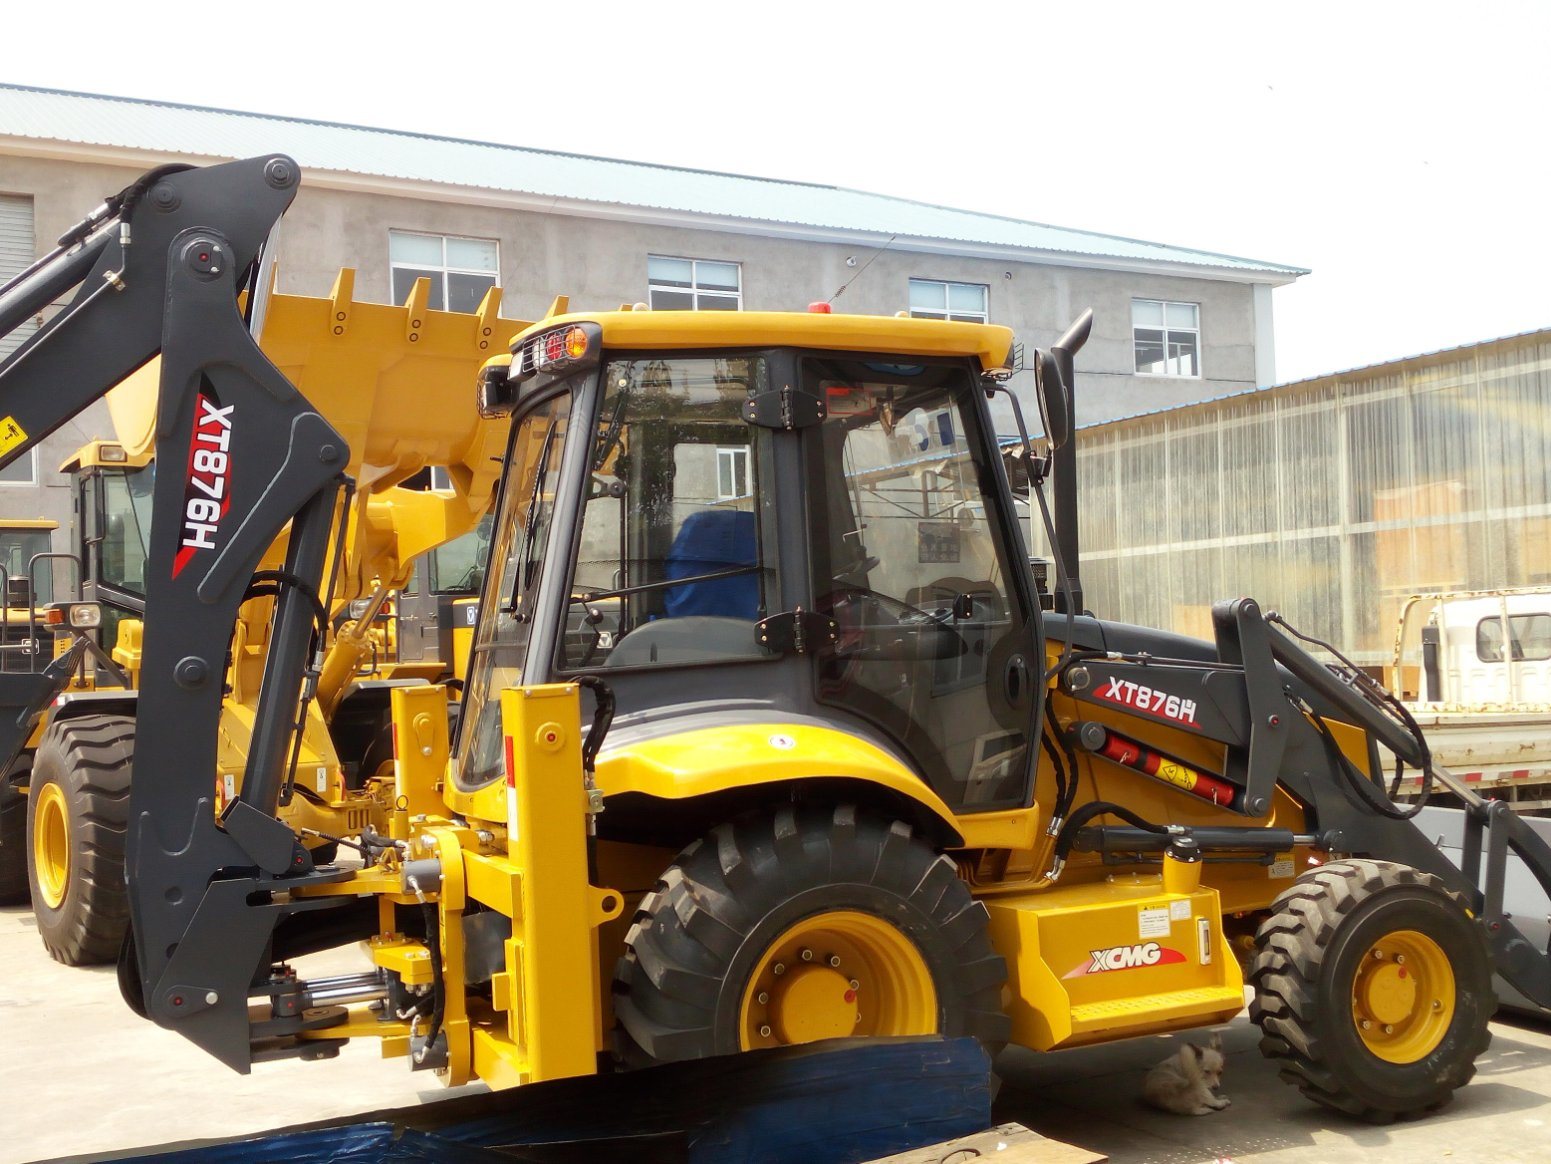 X876h New Backhoe Loader with Attchments